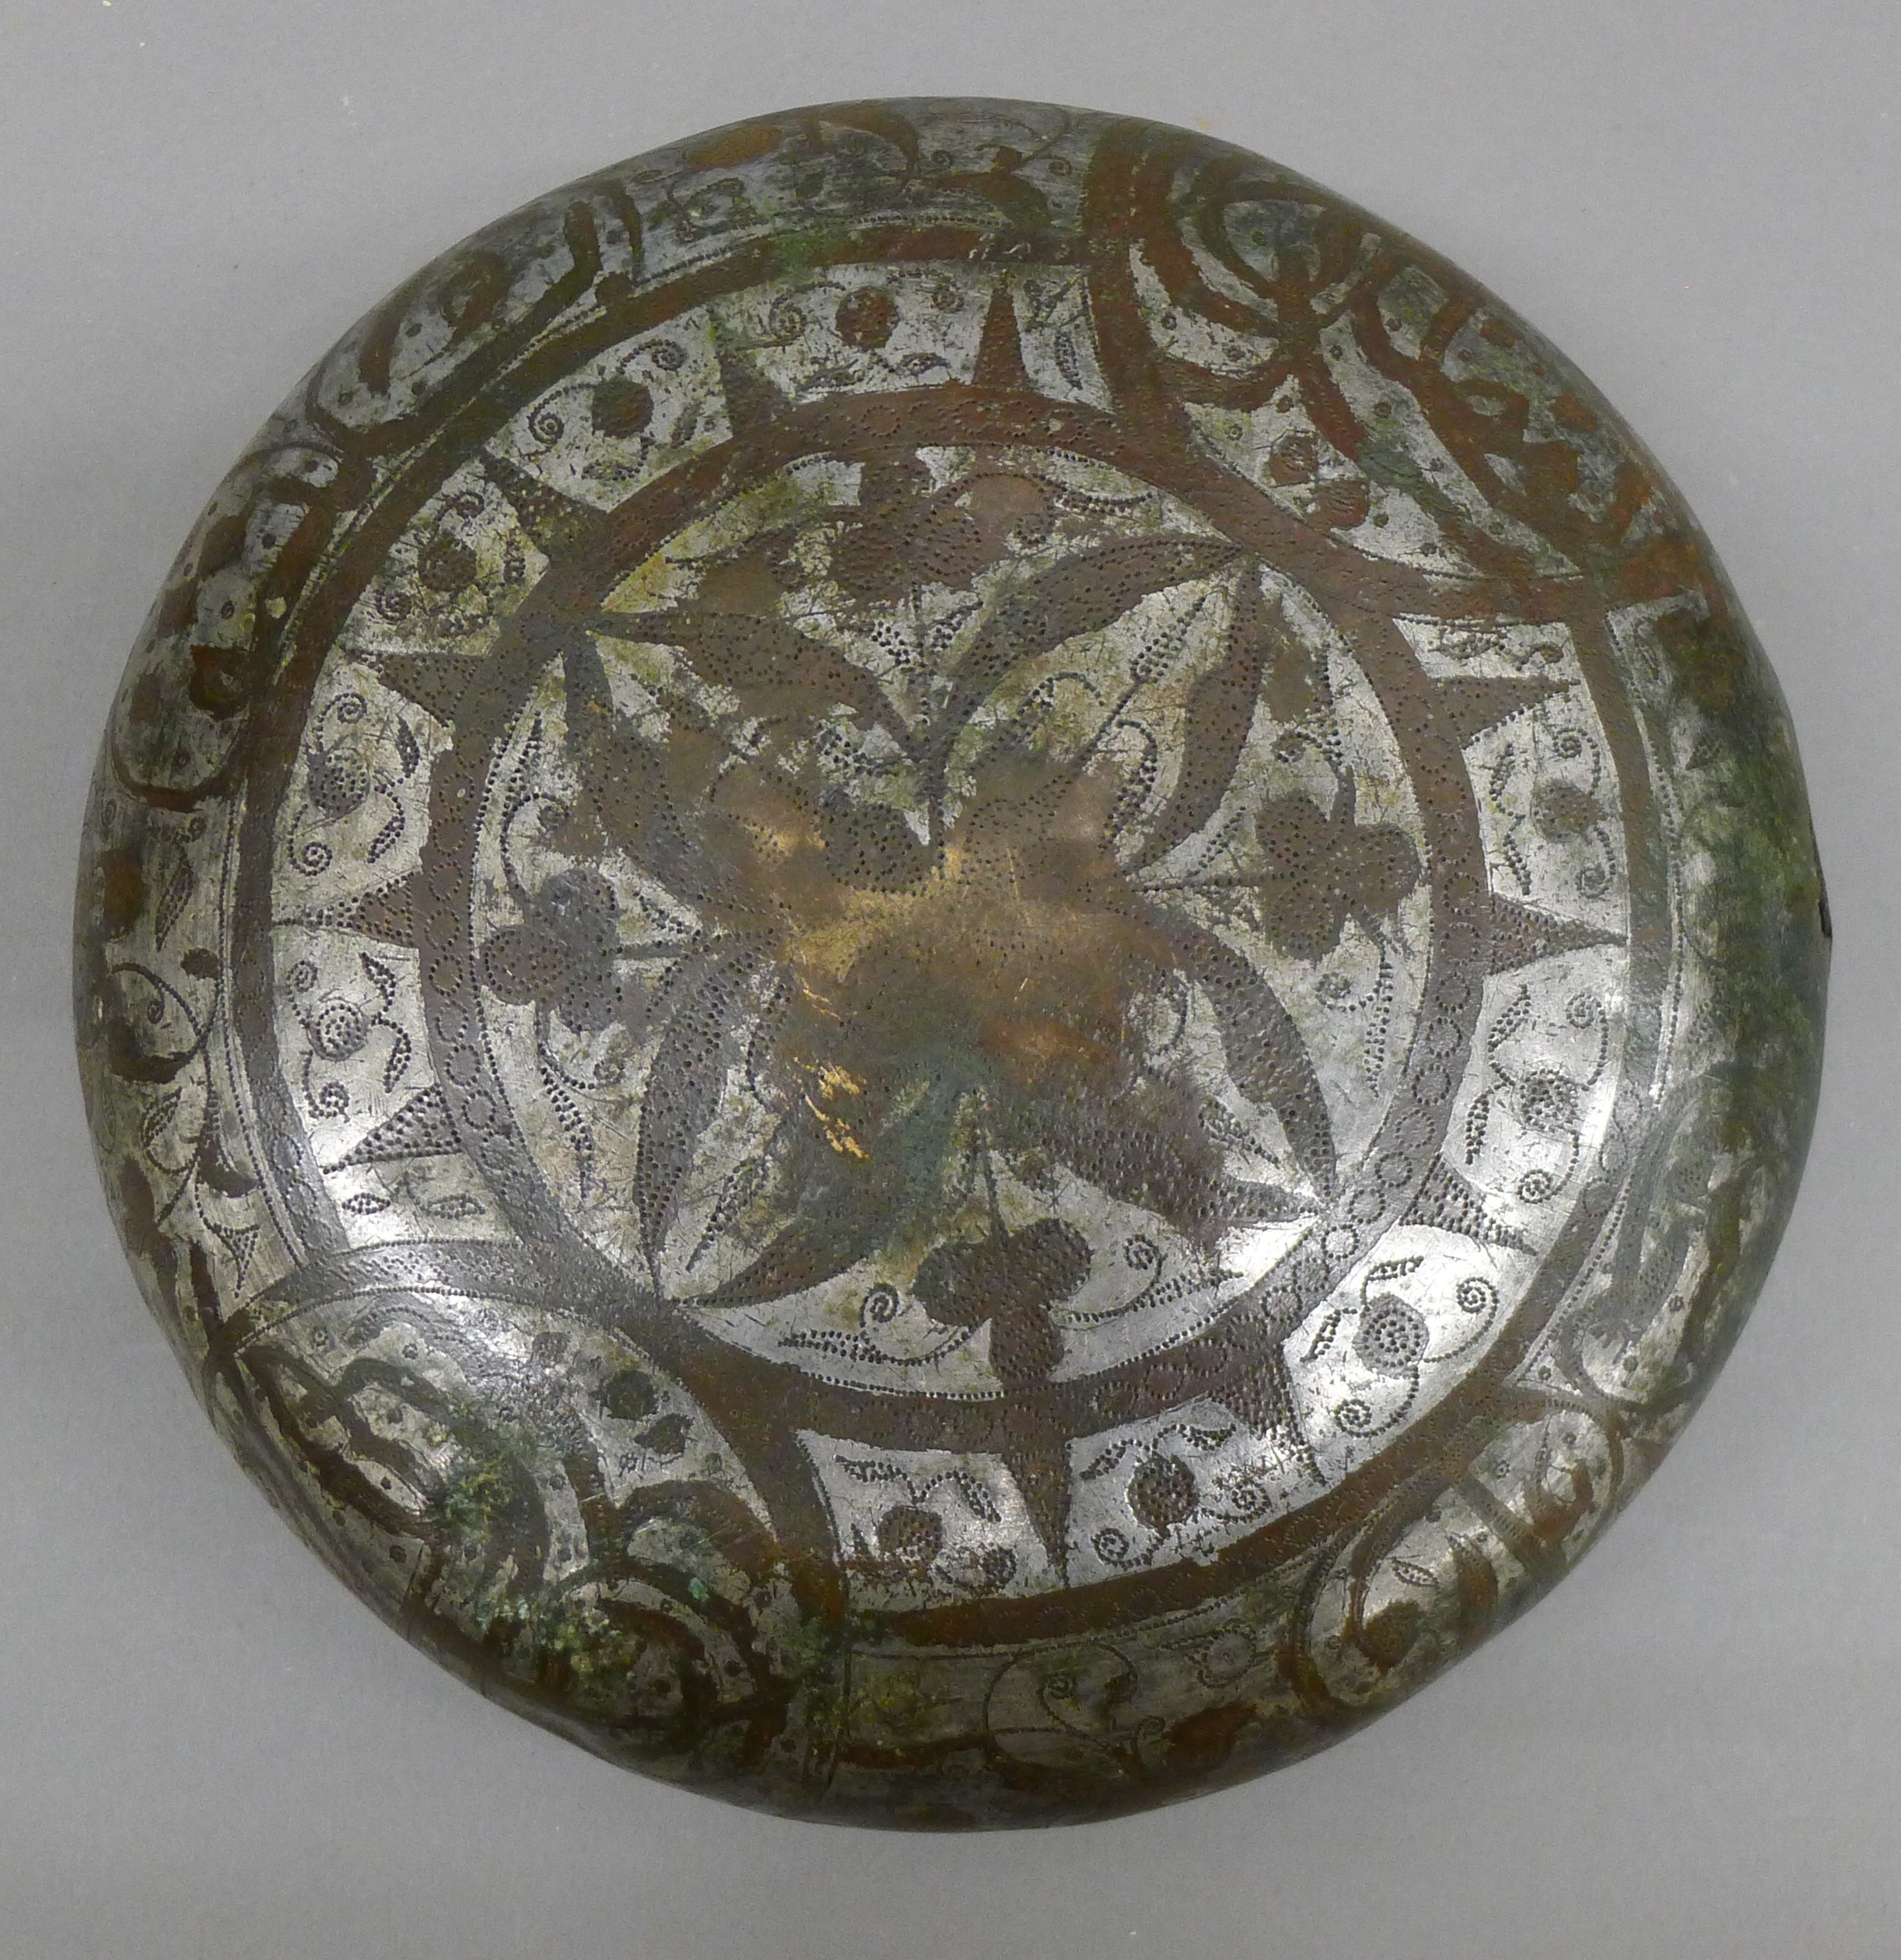 A 17th/18th century unmarked silver onlaid Islamic bowl. 19.5 cm diameter. - Image 6 of 6